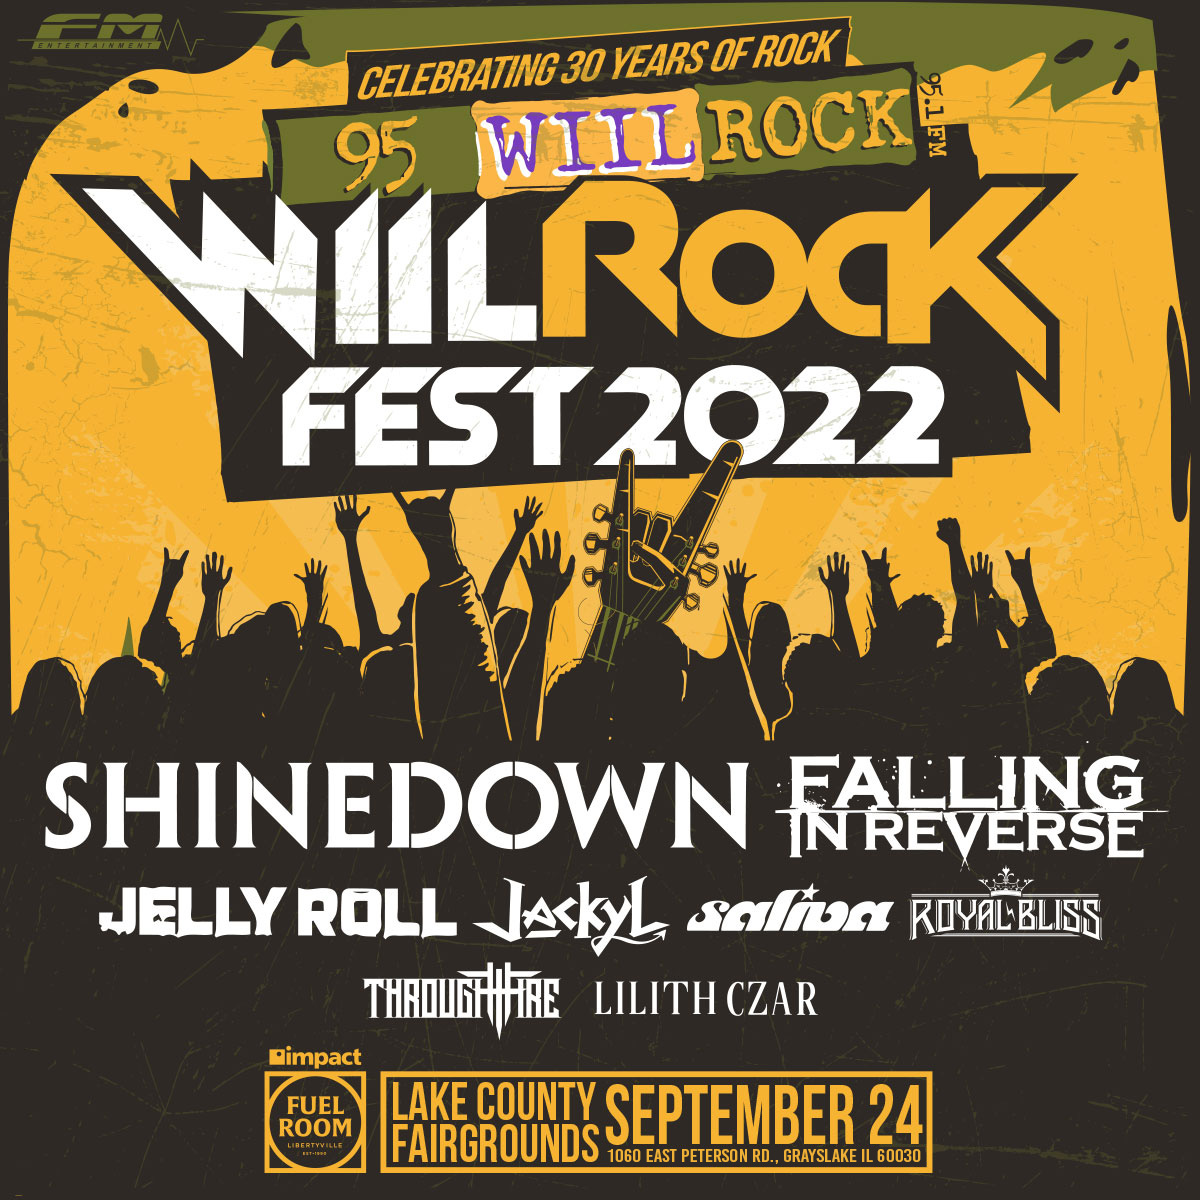 95 WIIL Rock Fest - Celebrating 30 Years of Rock show poster